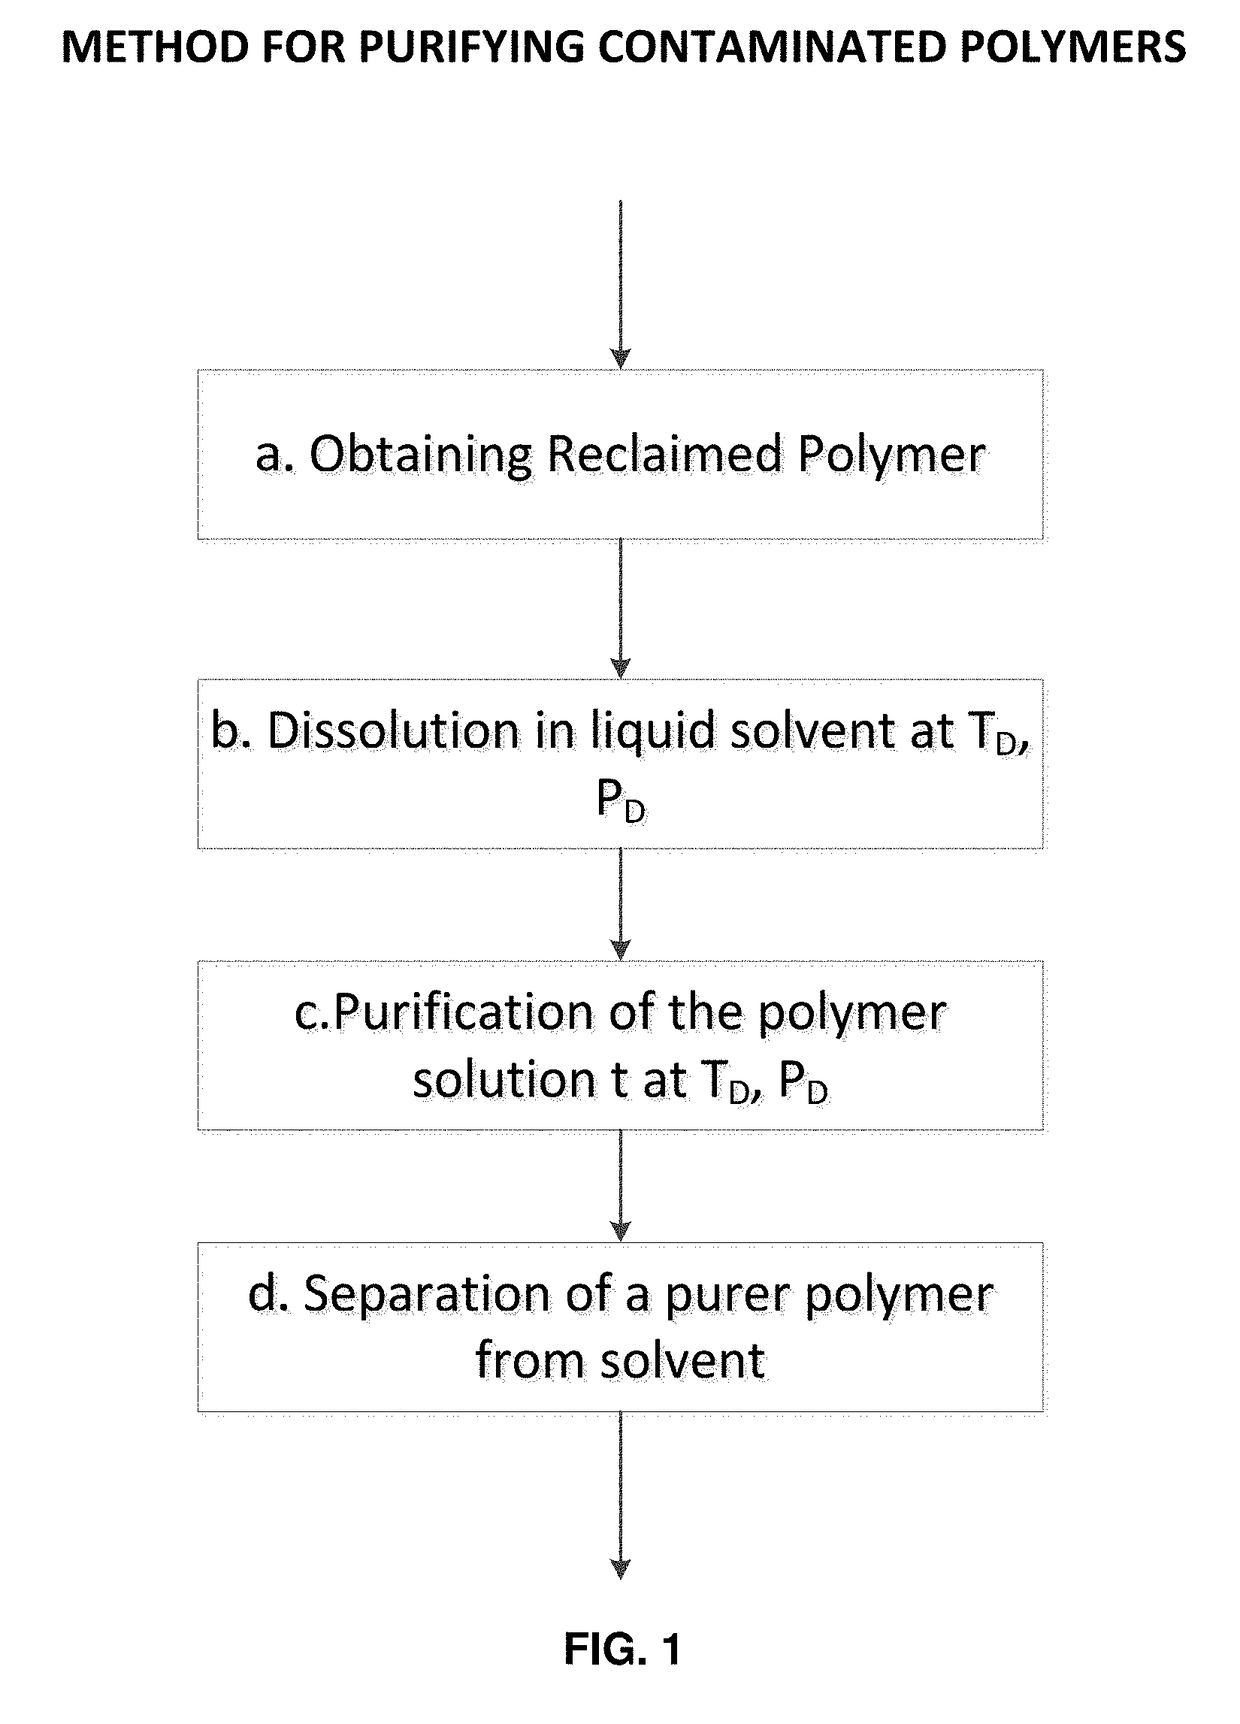 Method for purifying contaminated polymers